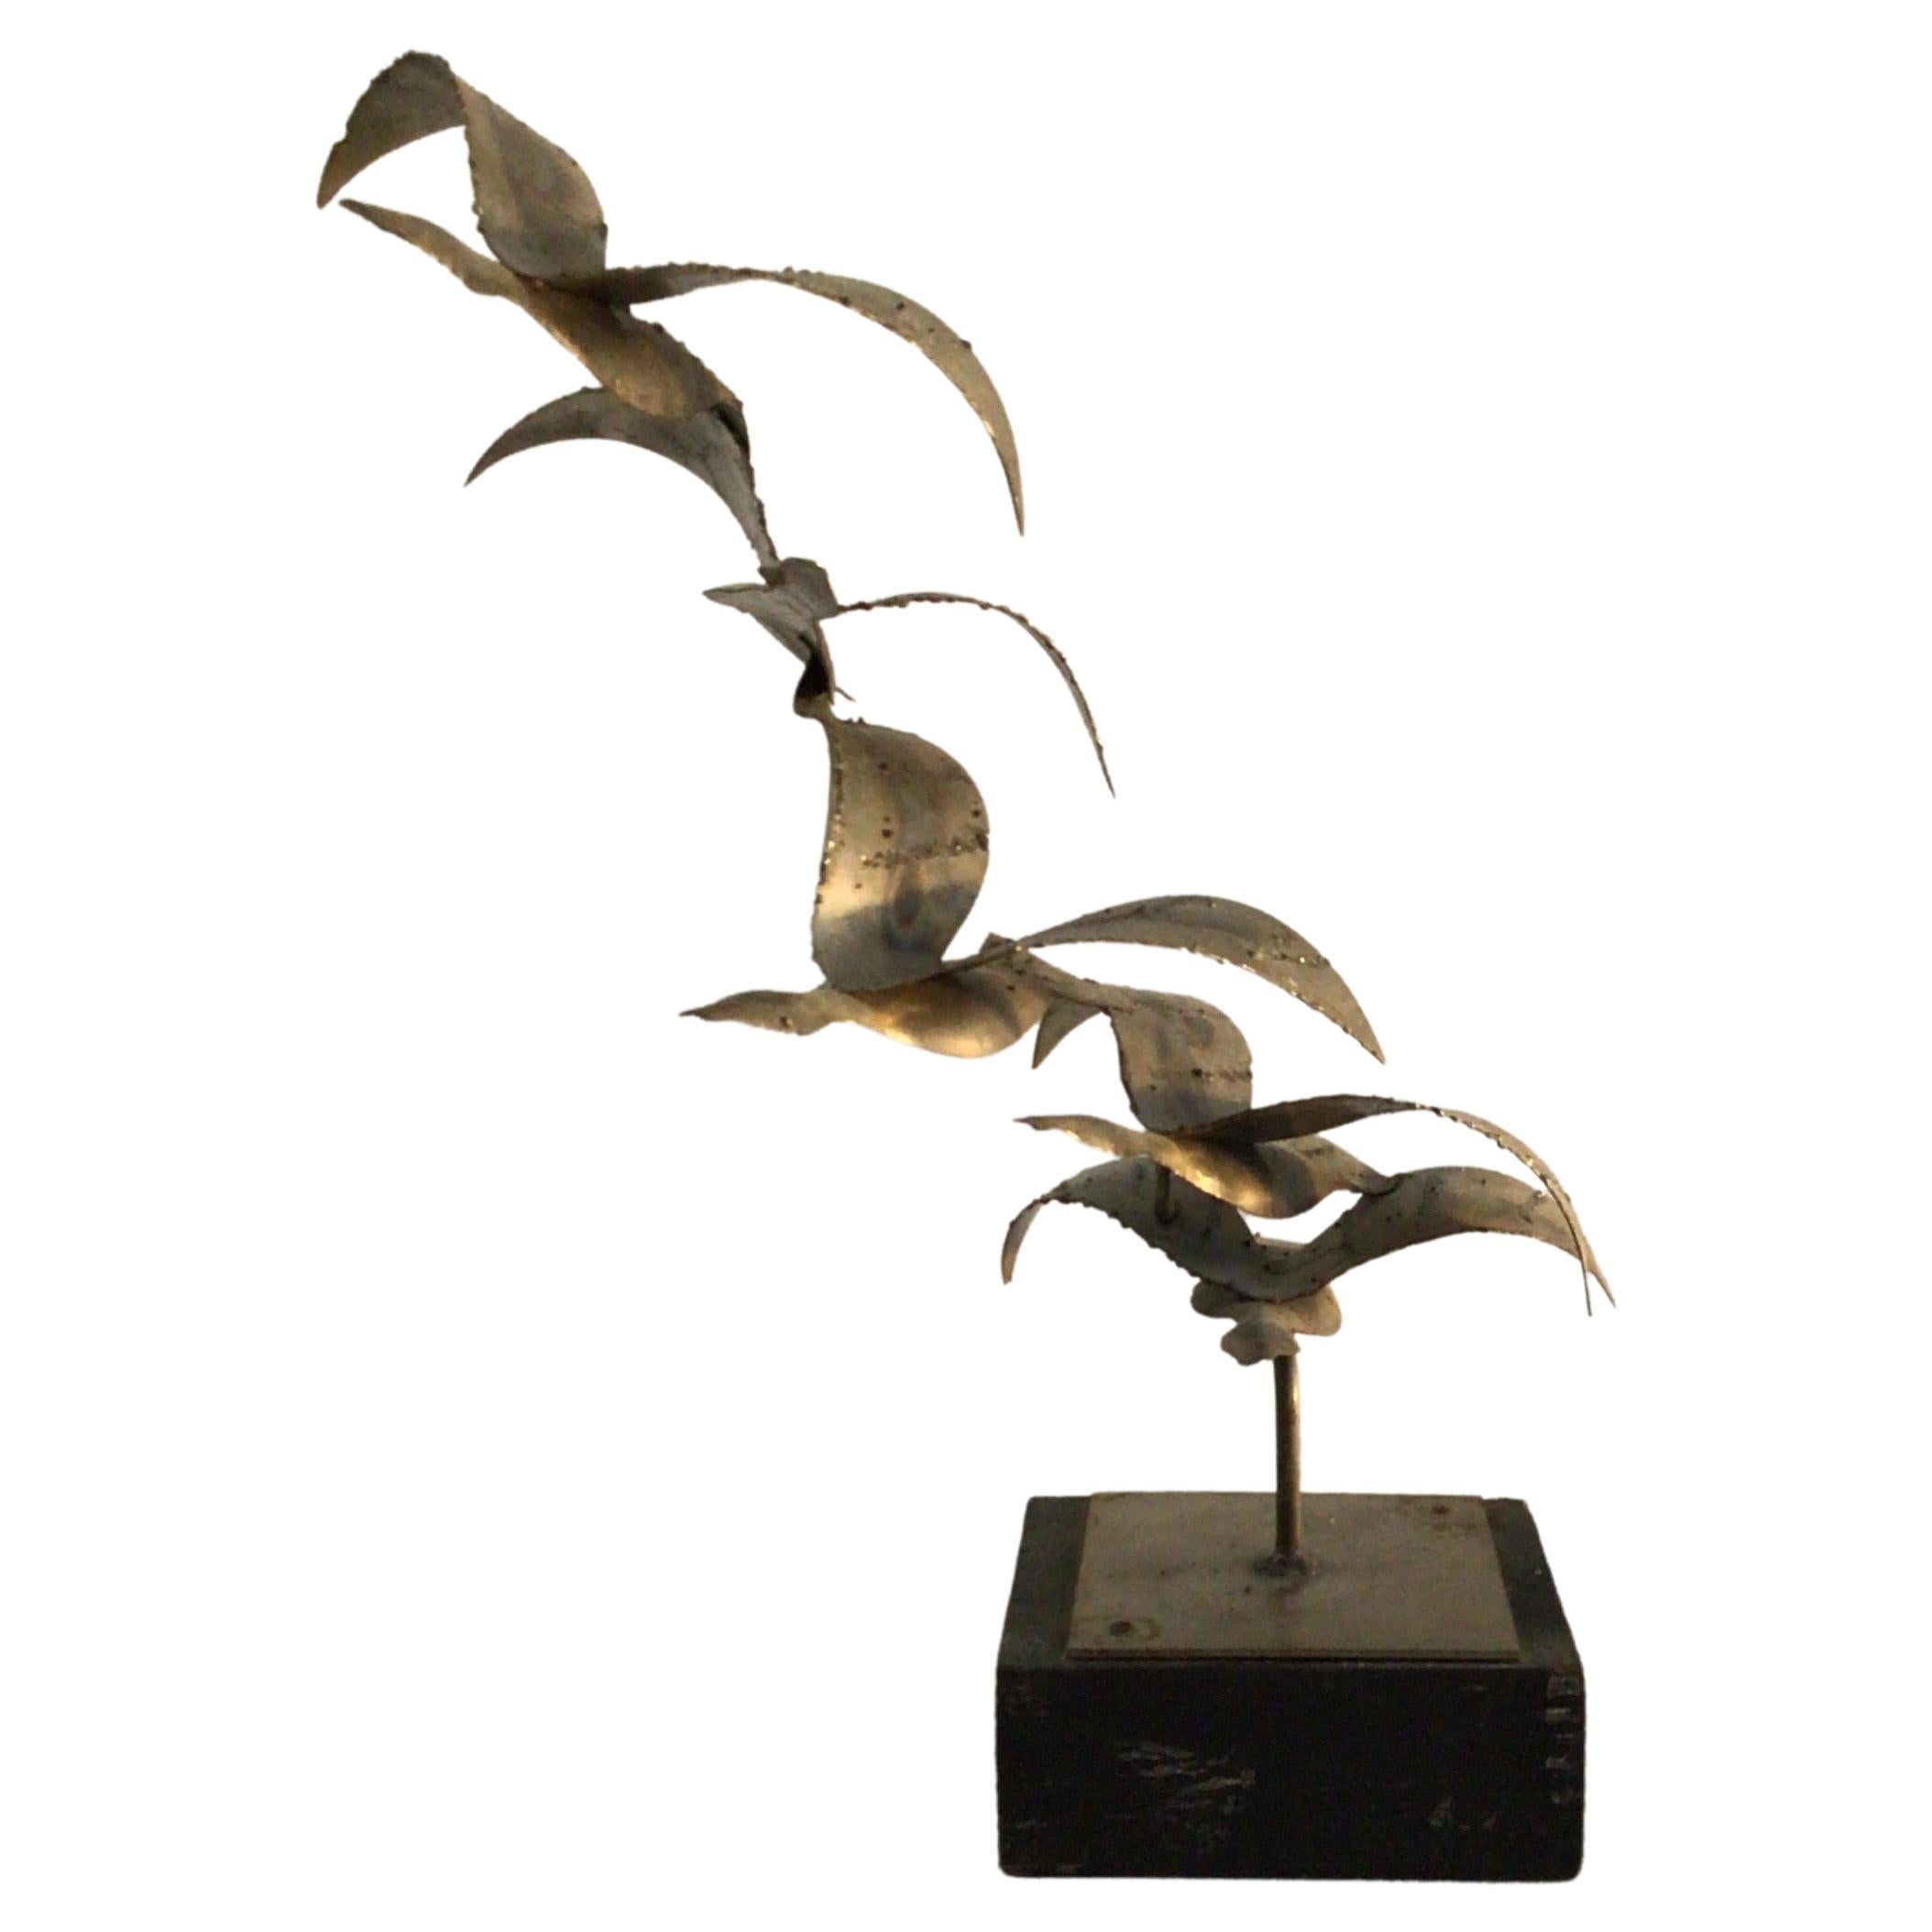 1970s Chrome Sculpture of Birds in Flight on Painted Wood Base For Sale